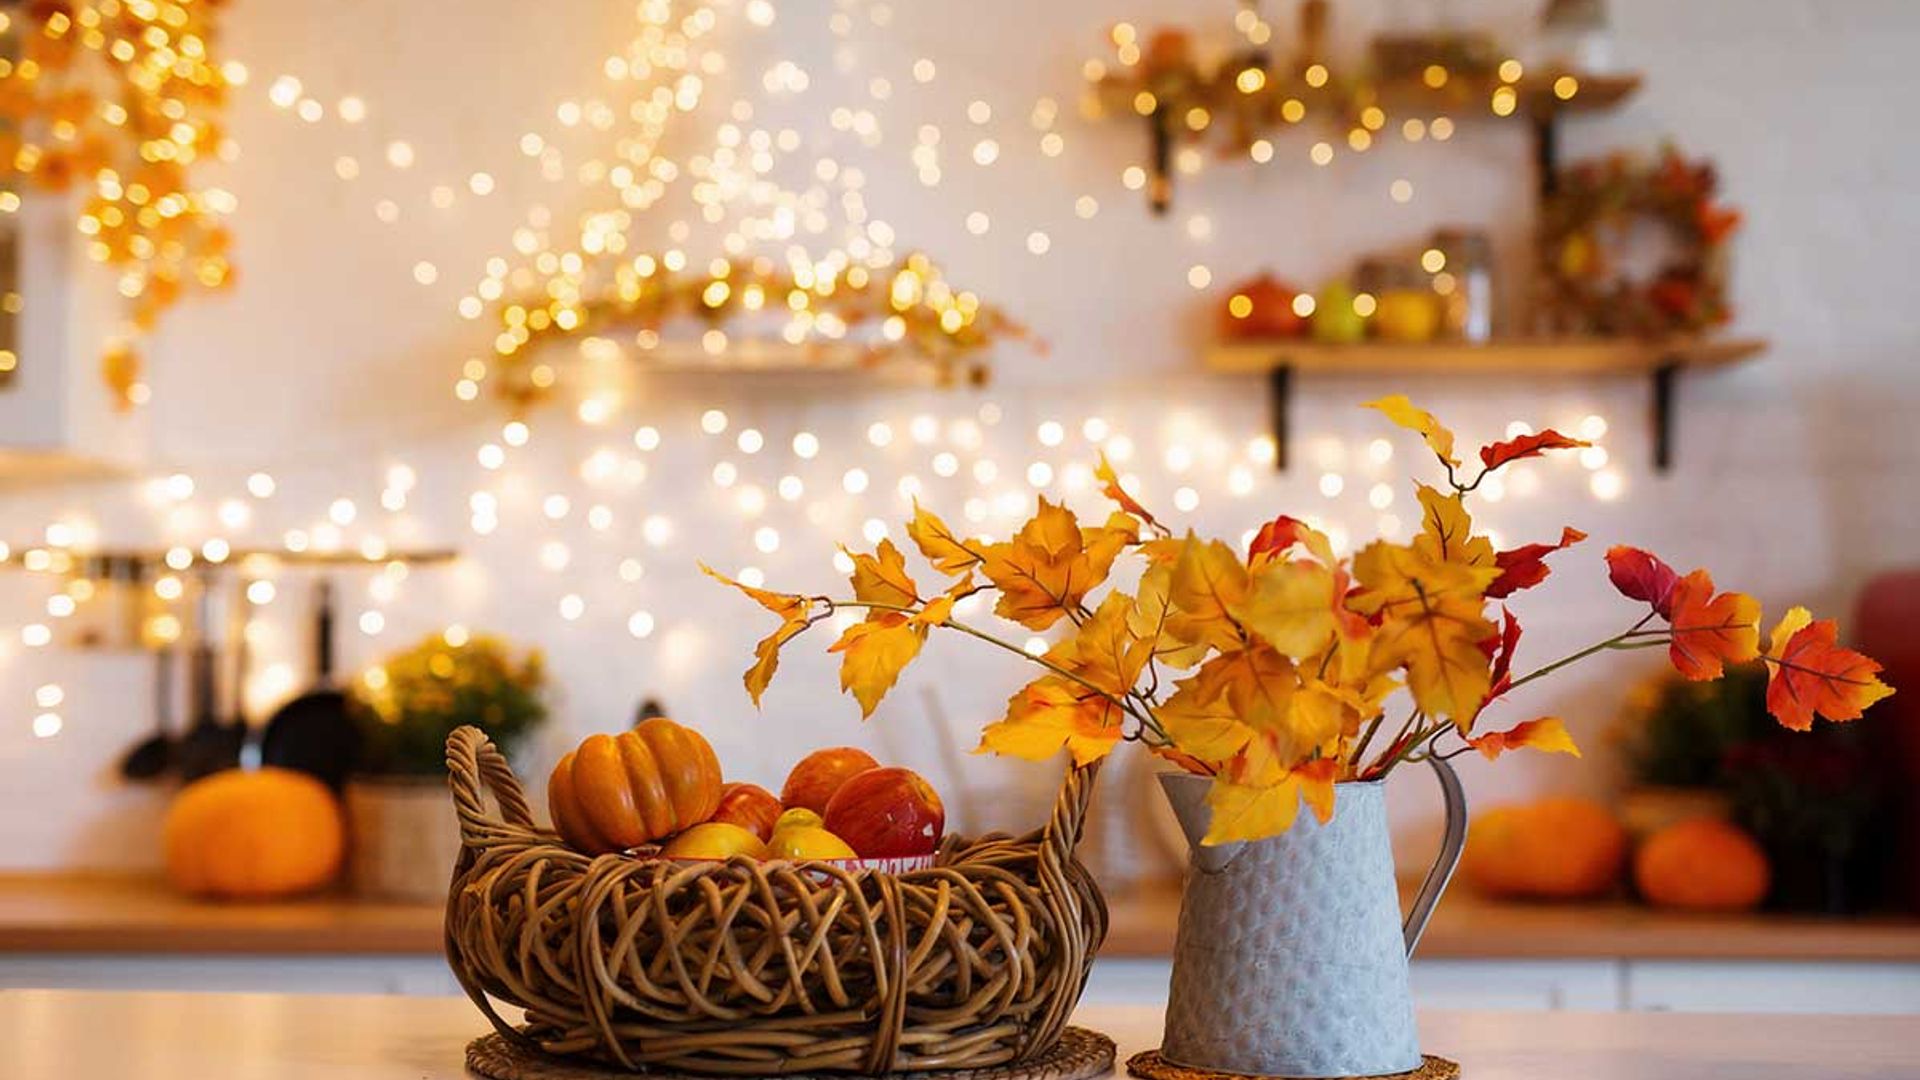 Best autumn home decor ideas 2022: From decorative pumpkins to cinnamon spiced candles